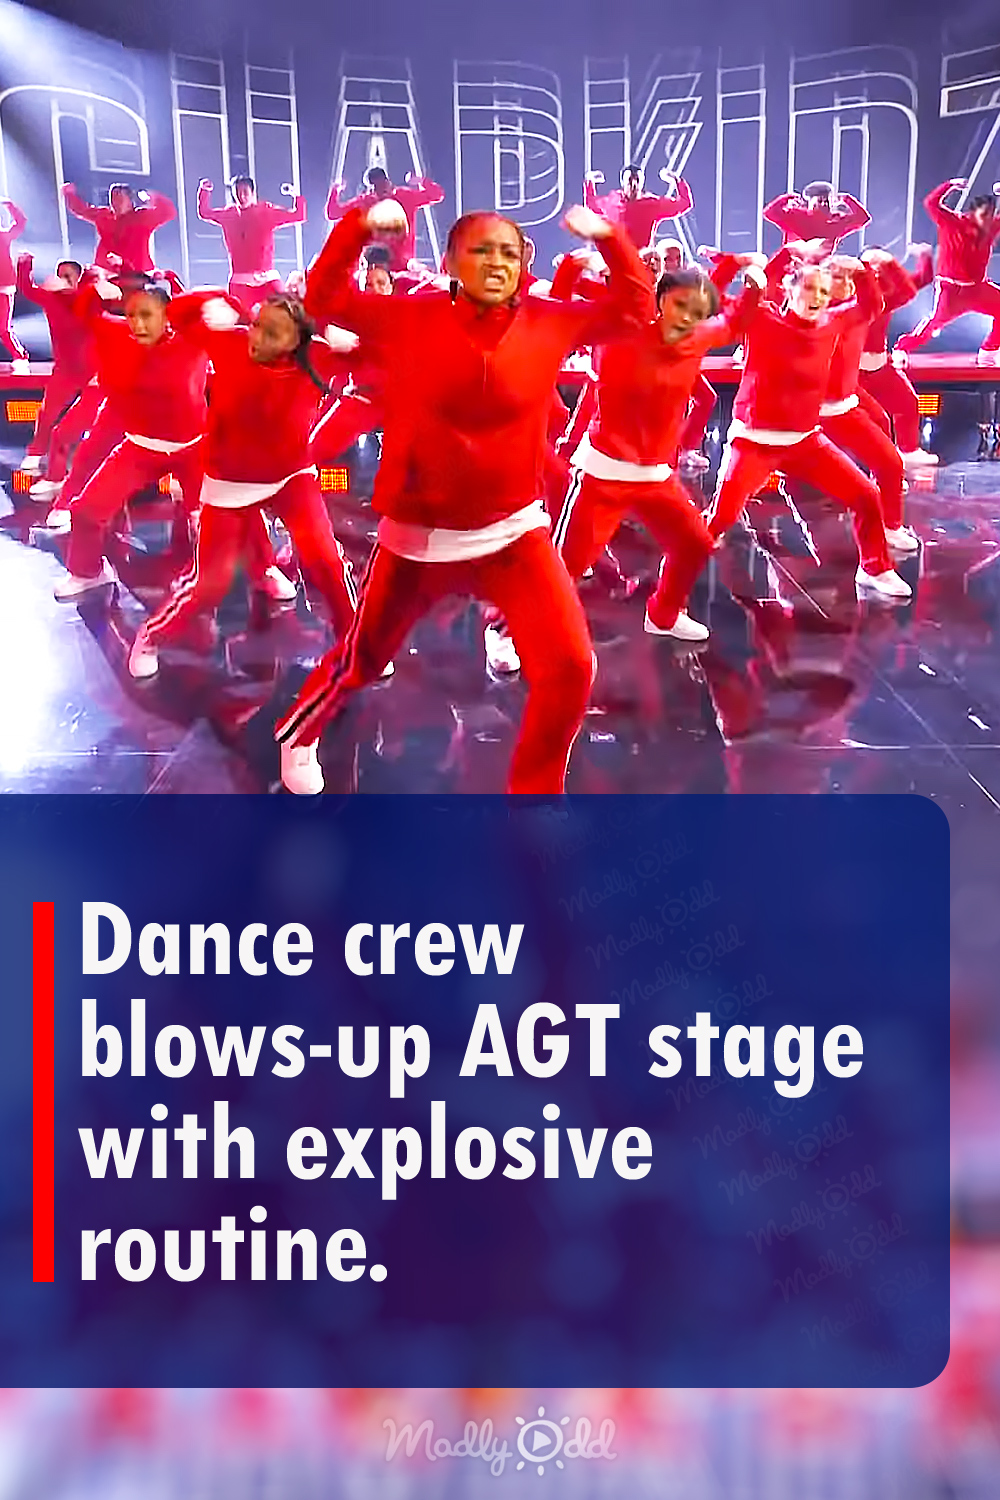 Dance crew blows-up AGT stage with explosive routine.